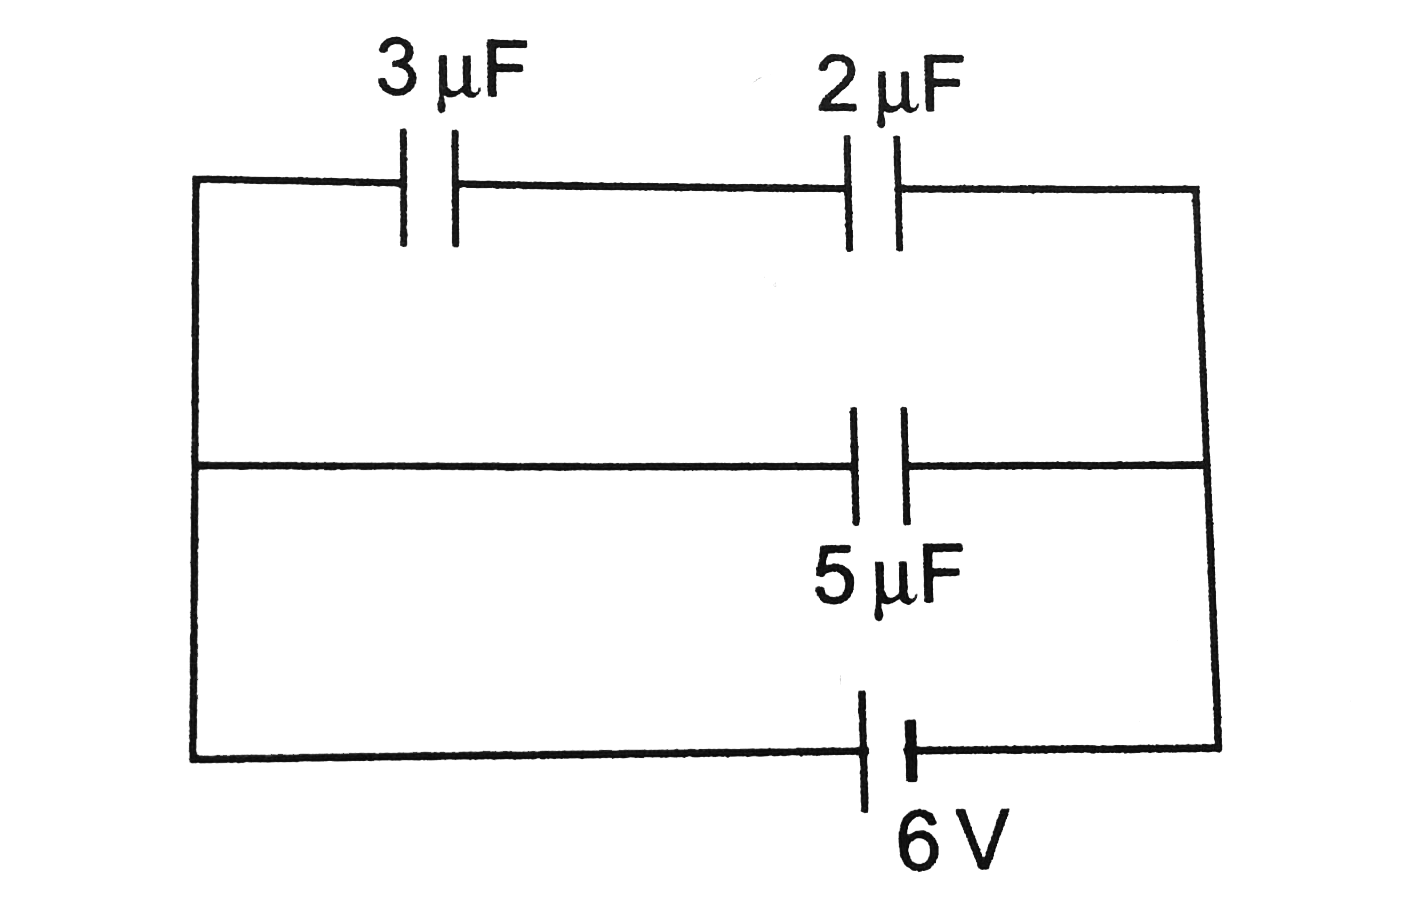 In the circuit shown in figure, the ratio of charge on 5muF and 2muF capacitor is